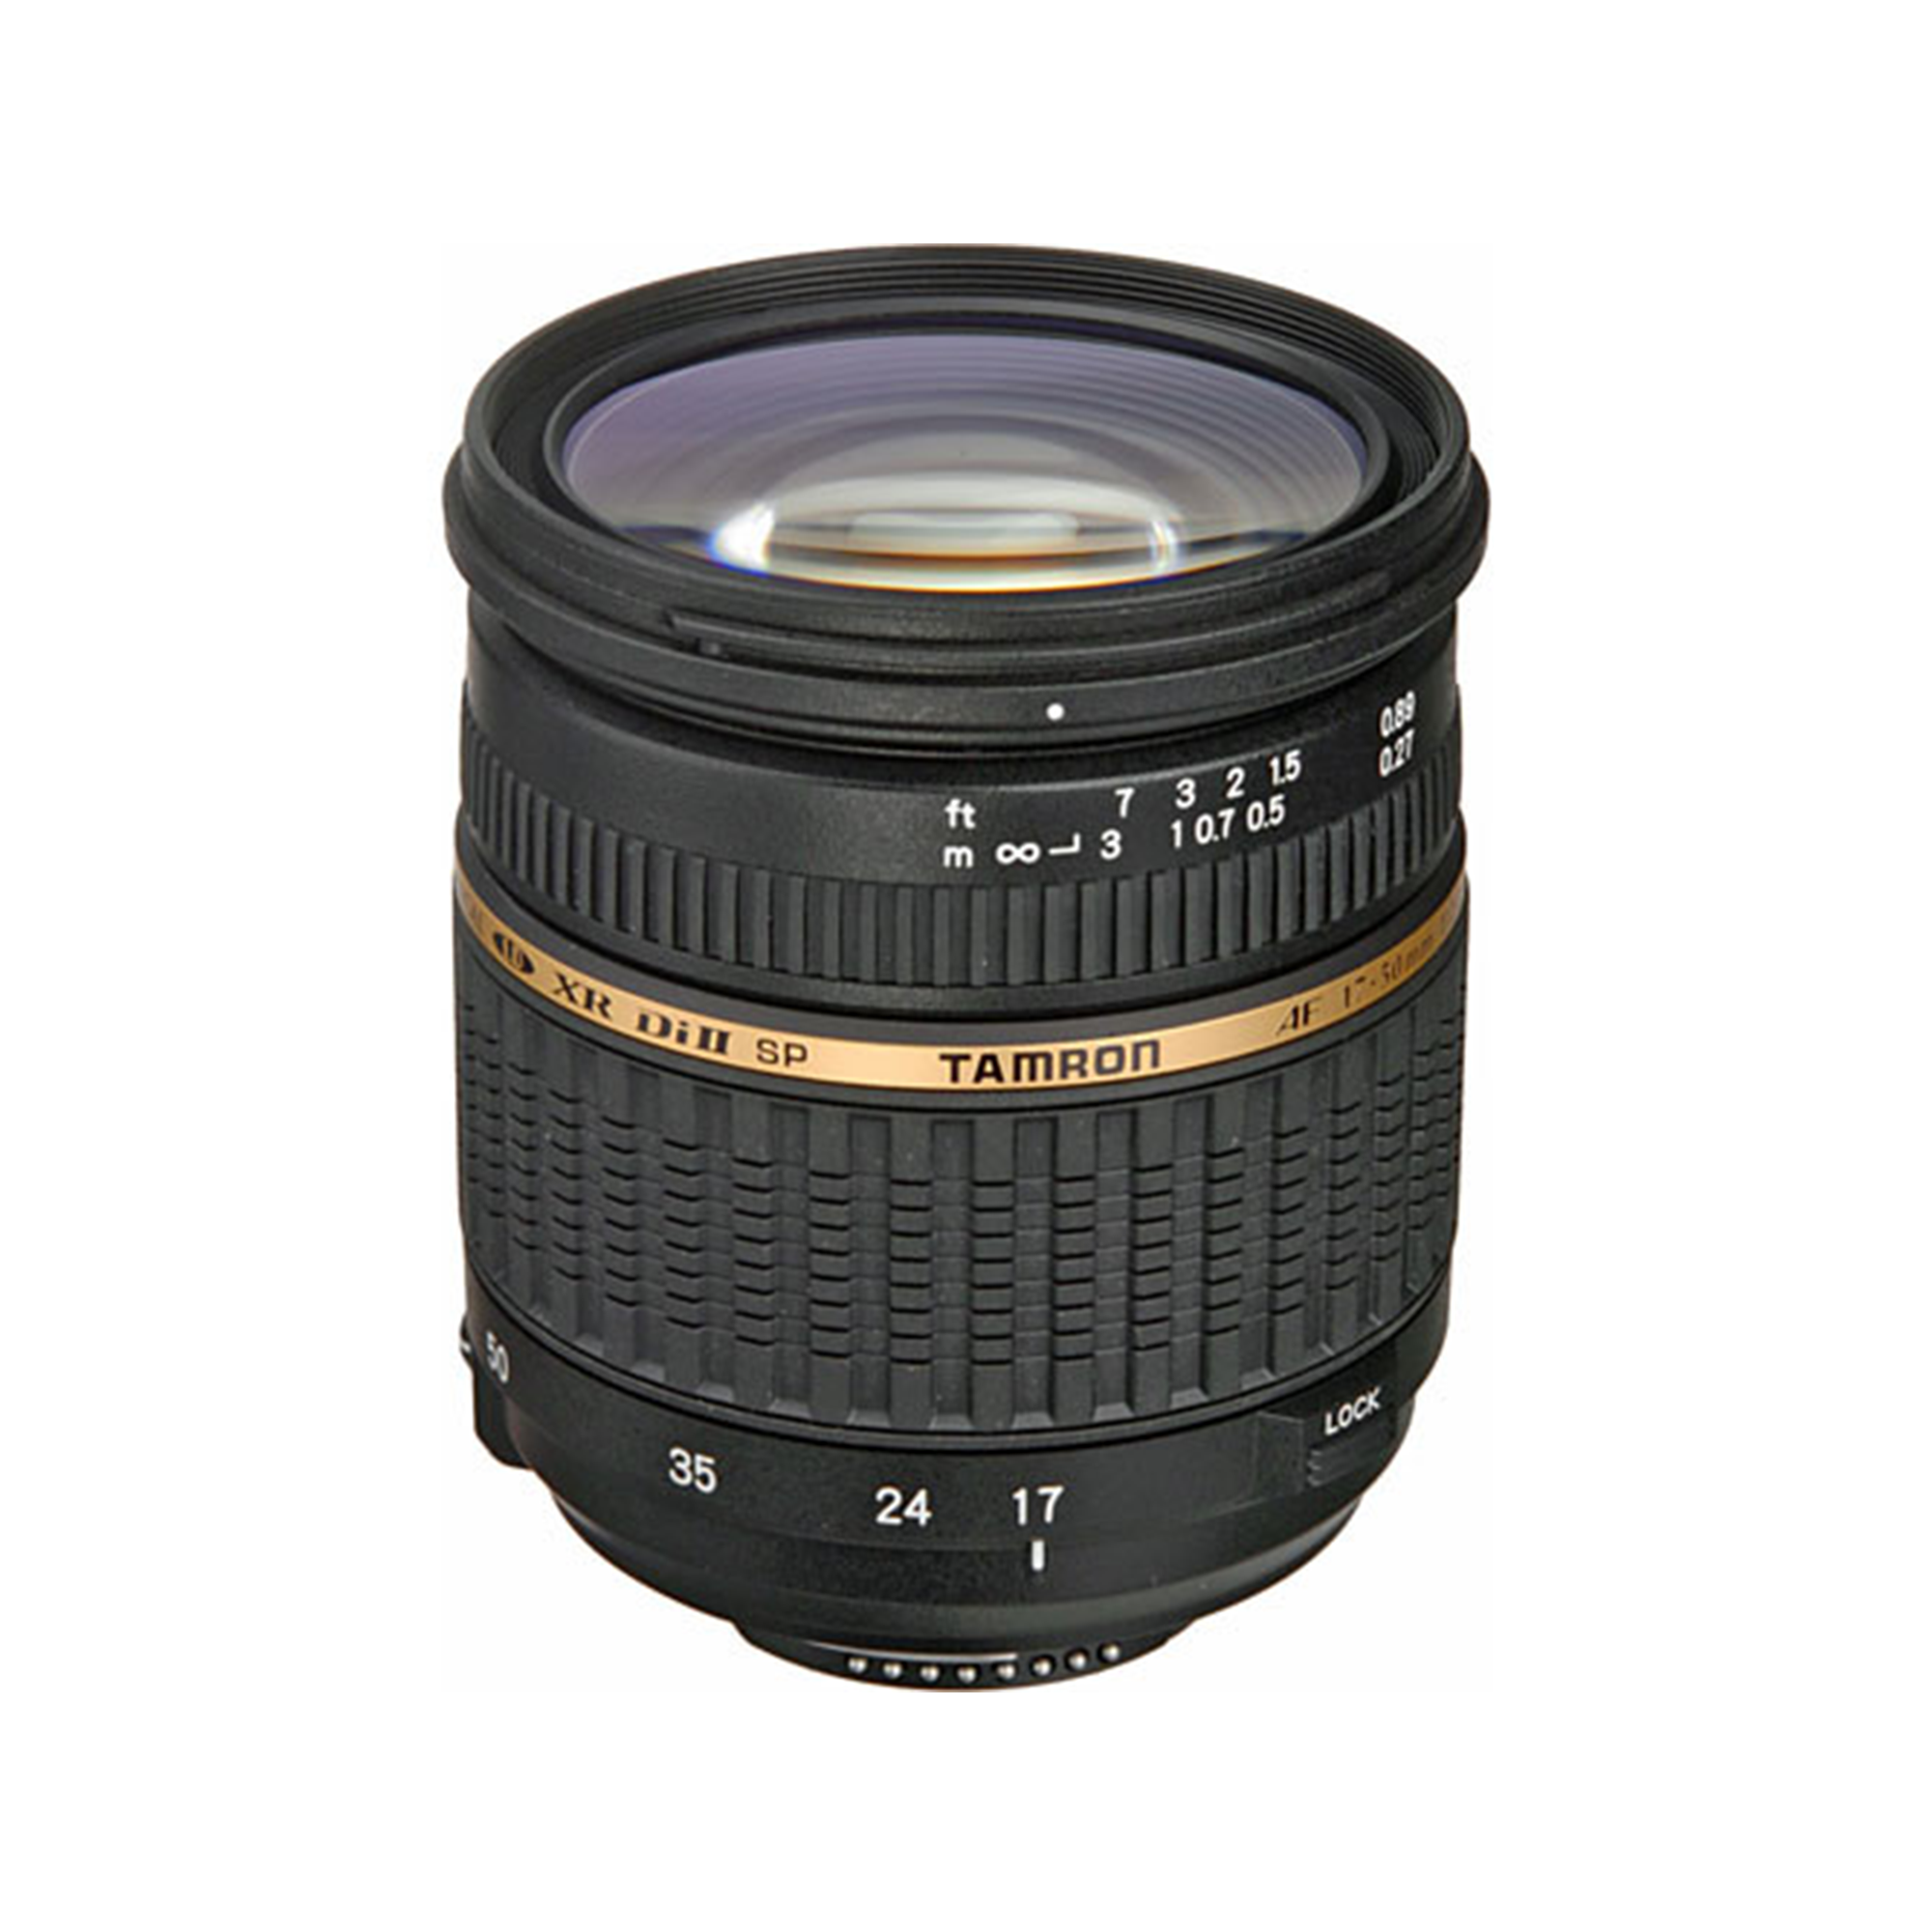 Tamron SP 17-50mm f/2.8 Di II  Lens for Canon